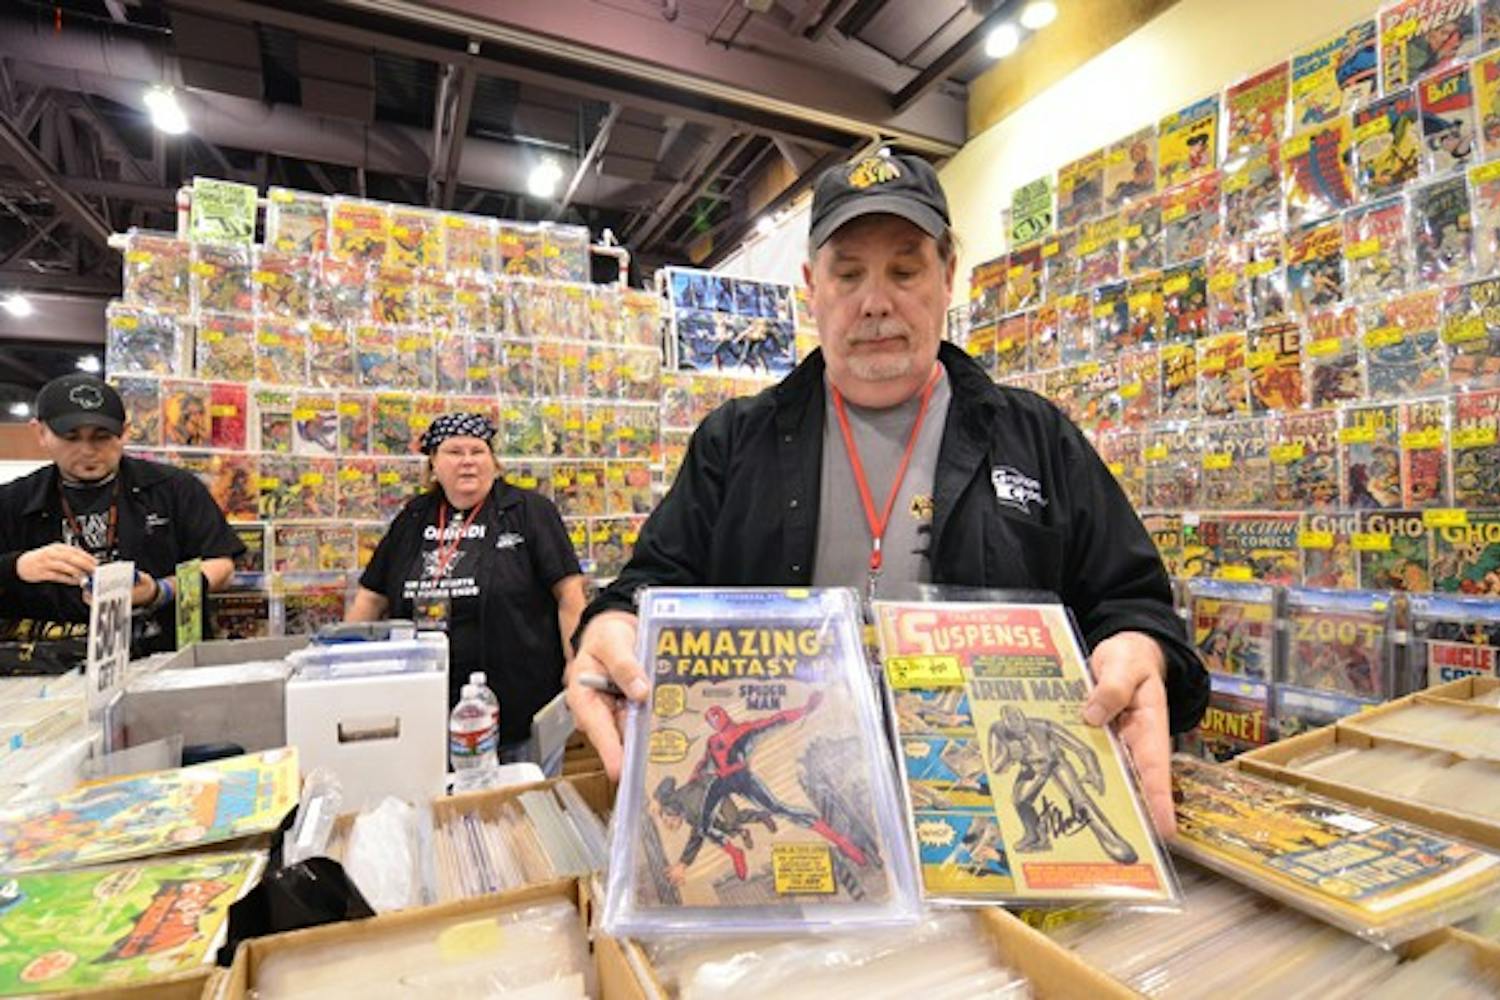 FIRST  APPEARANCE: Jamie Graham, owner of Graham Crackers Comics based in Chicago, shows off the rare comic books that debuted the popular characters Ironman and Spiderman. (Photo by Aaron Lavinsky)